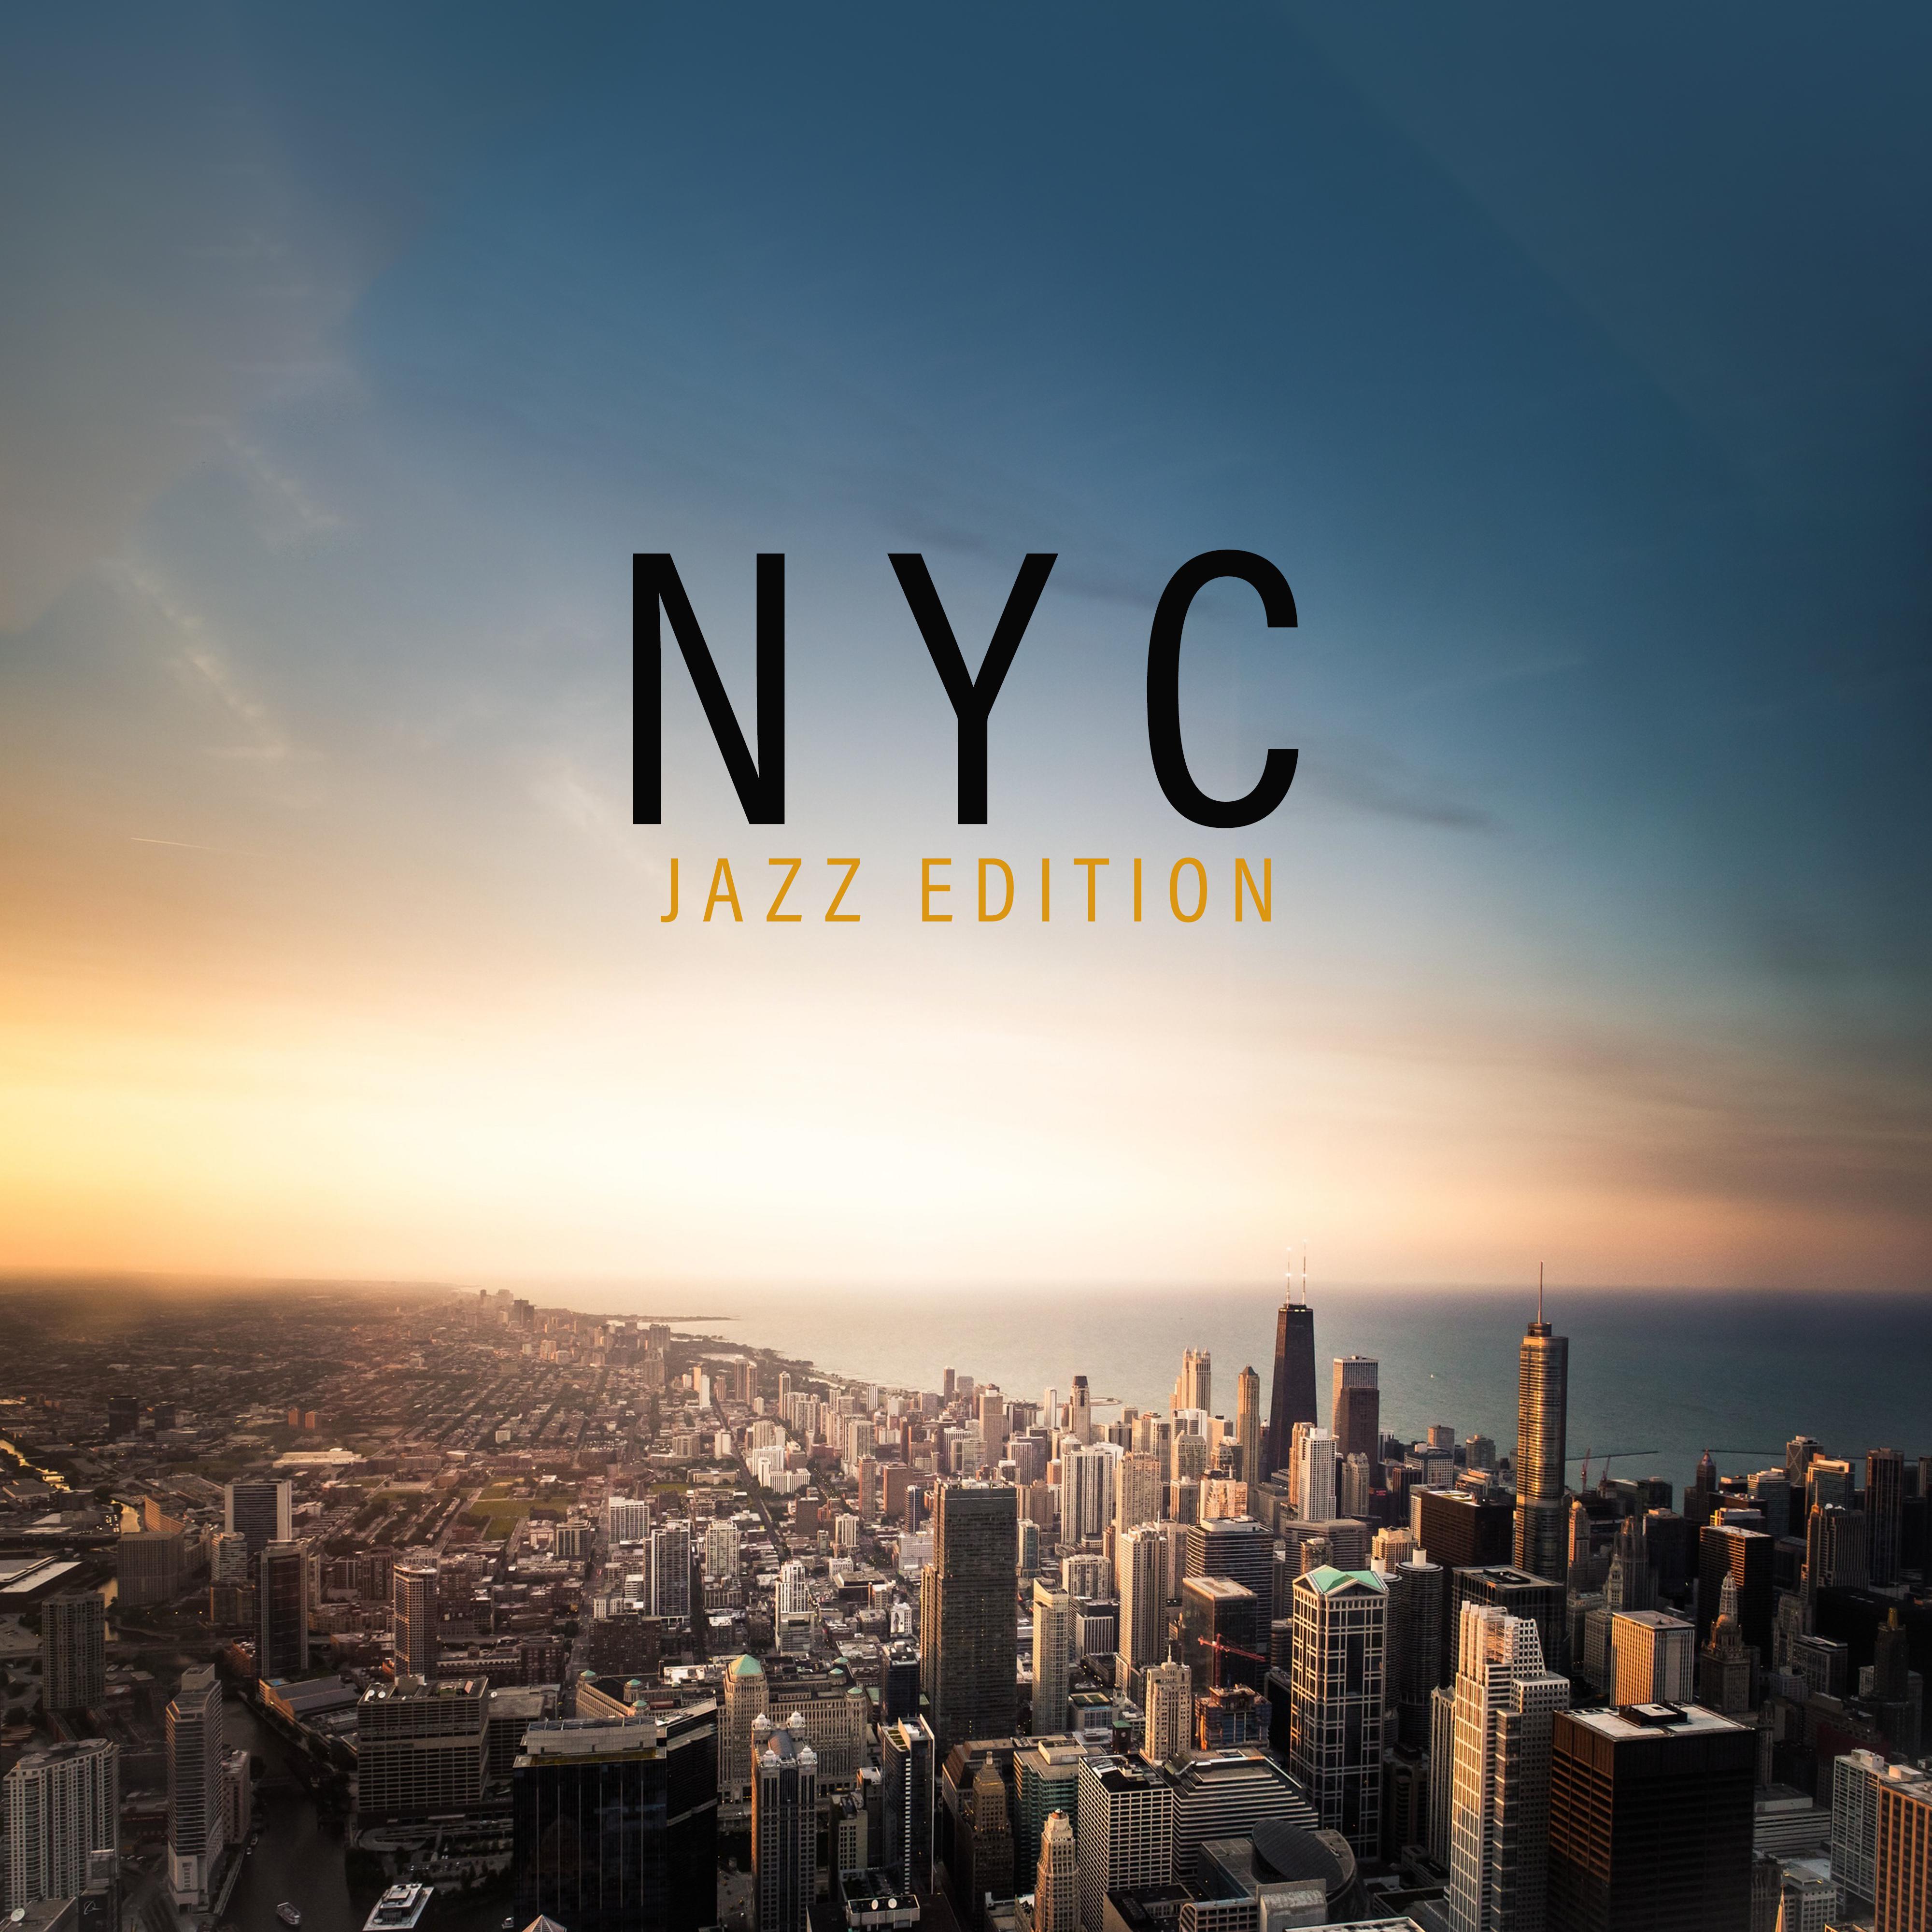 NYC Jazz Edition  Instrumental Music from the City That Never Sleeps"